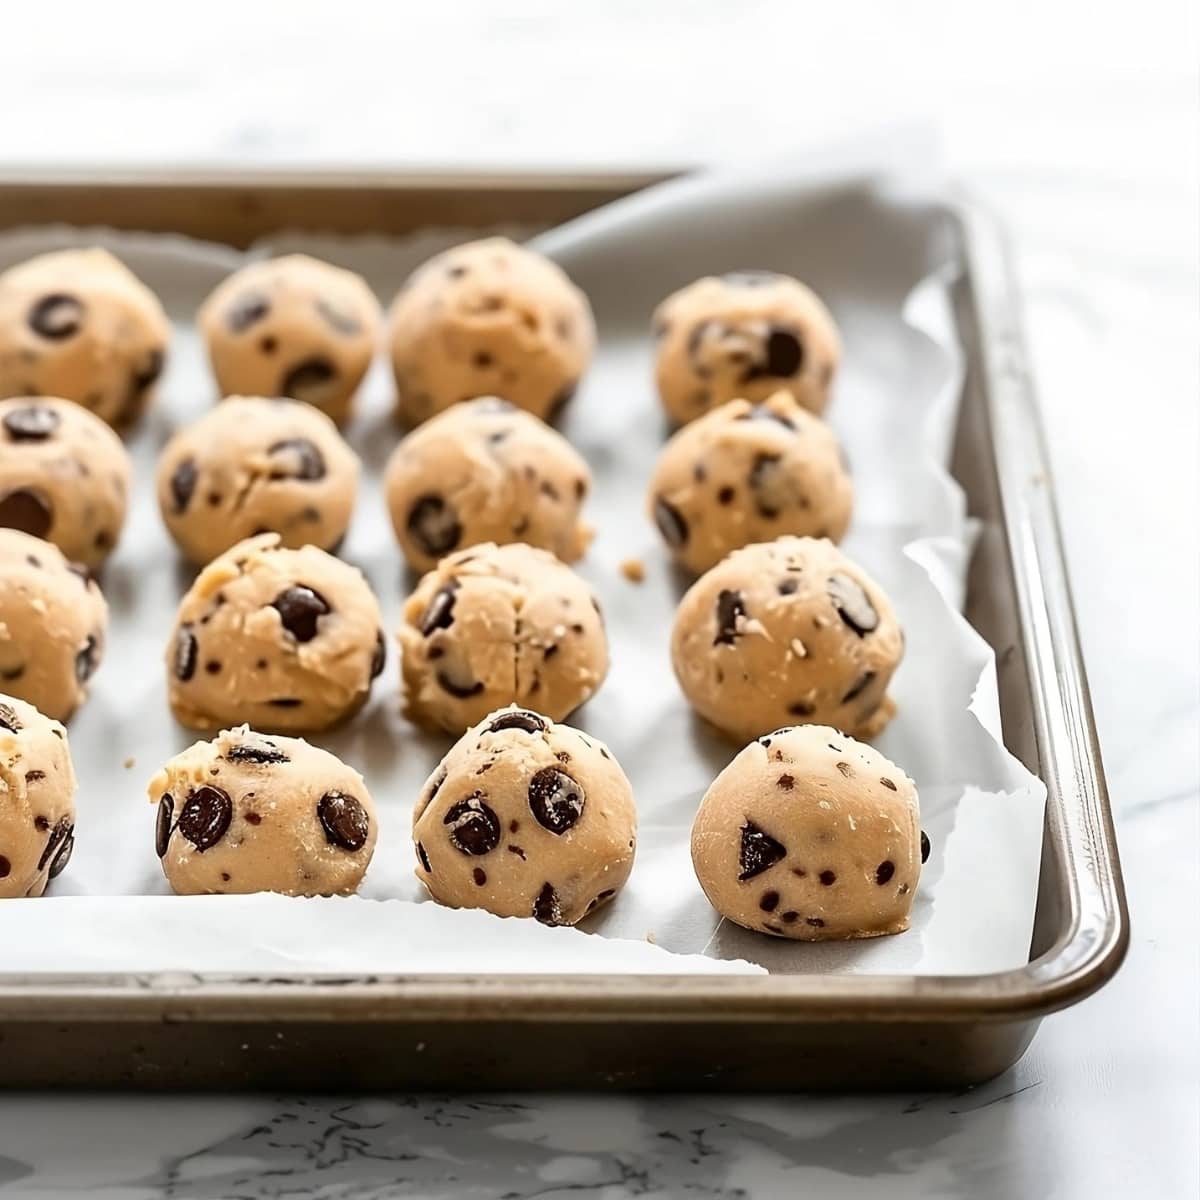 Edible cookie dough balls in a baking sheet with parchment paper.